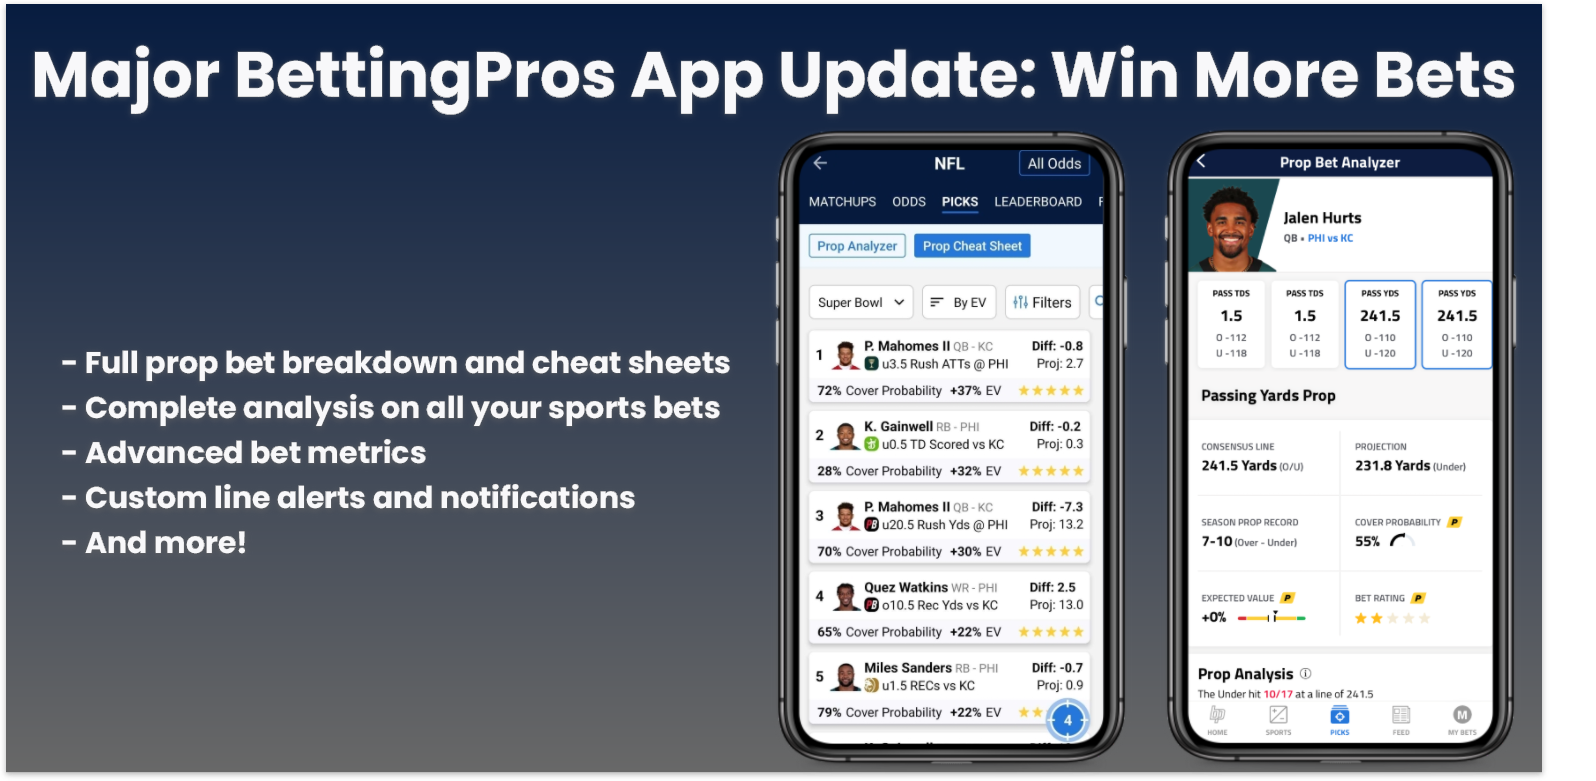 BettingPros App Update: Win More Bets with Updated Analysis and Advanced Bet Metrics